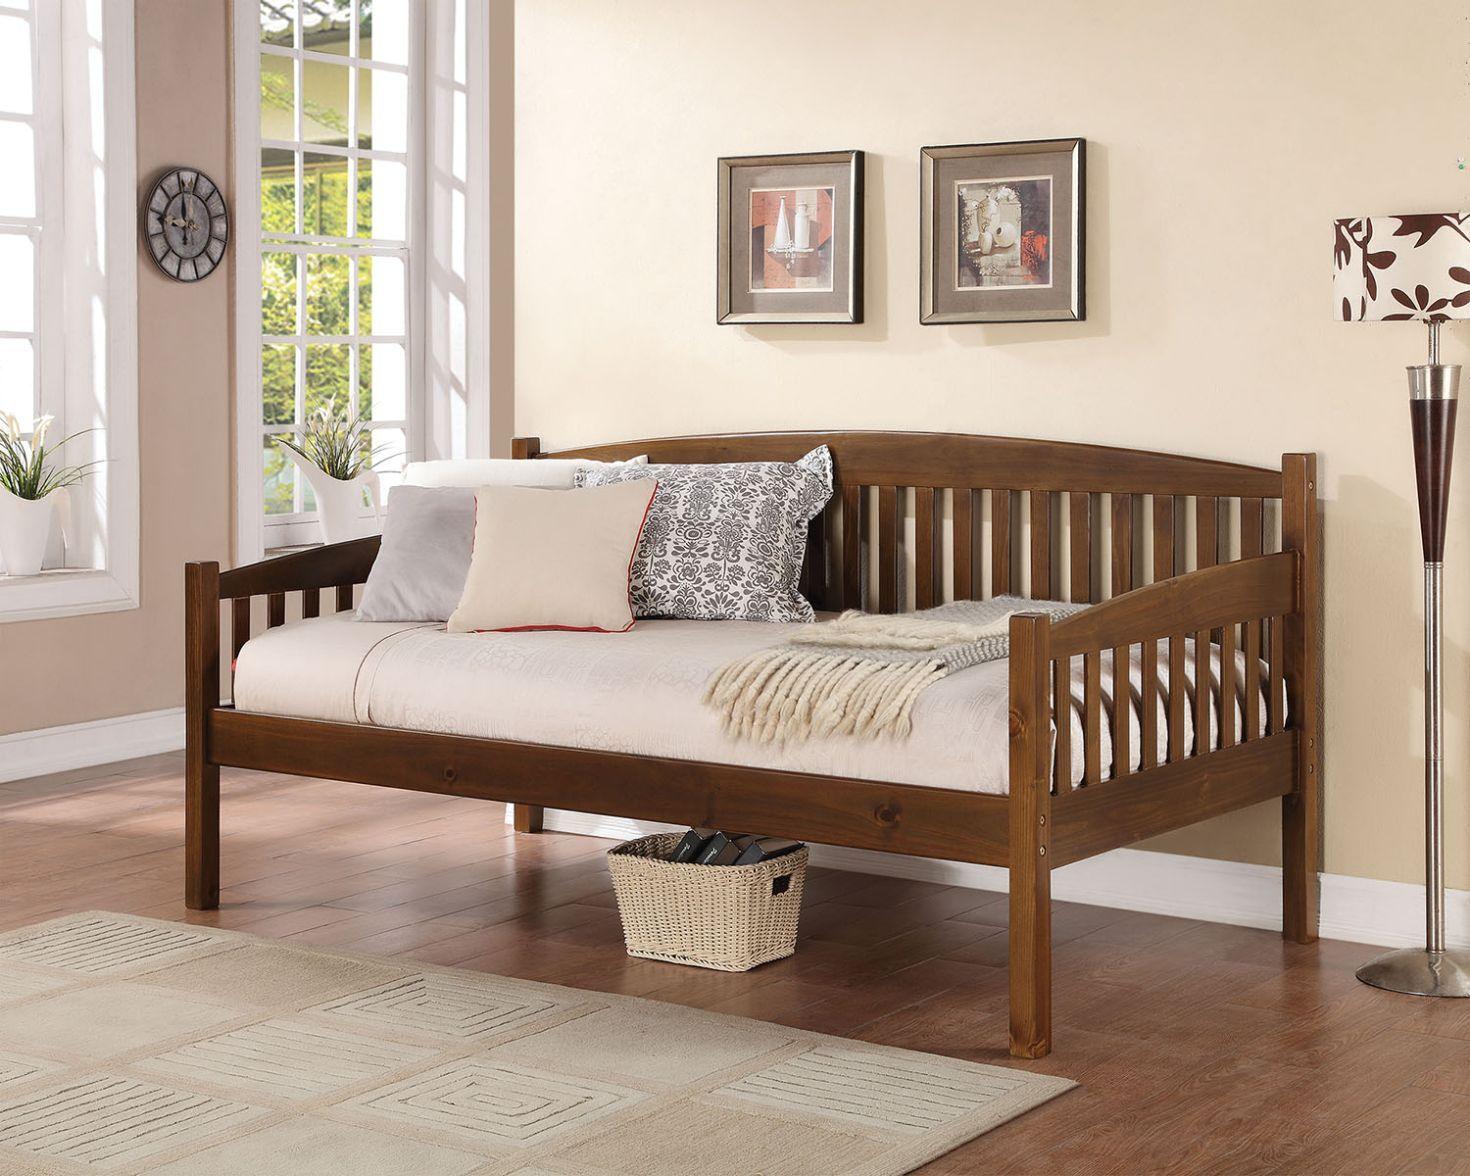 ACME - Caryn - Daybed - 5th Avenue Furniture